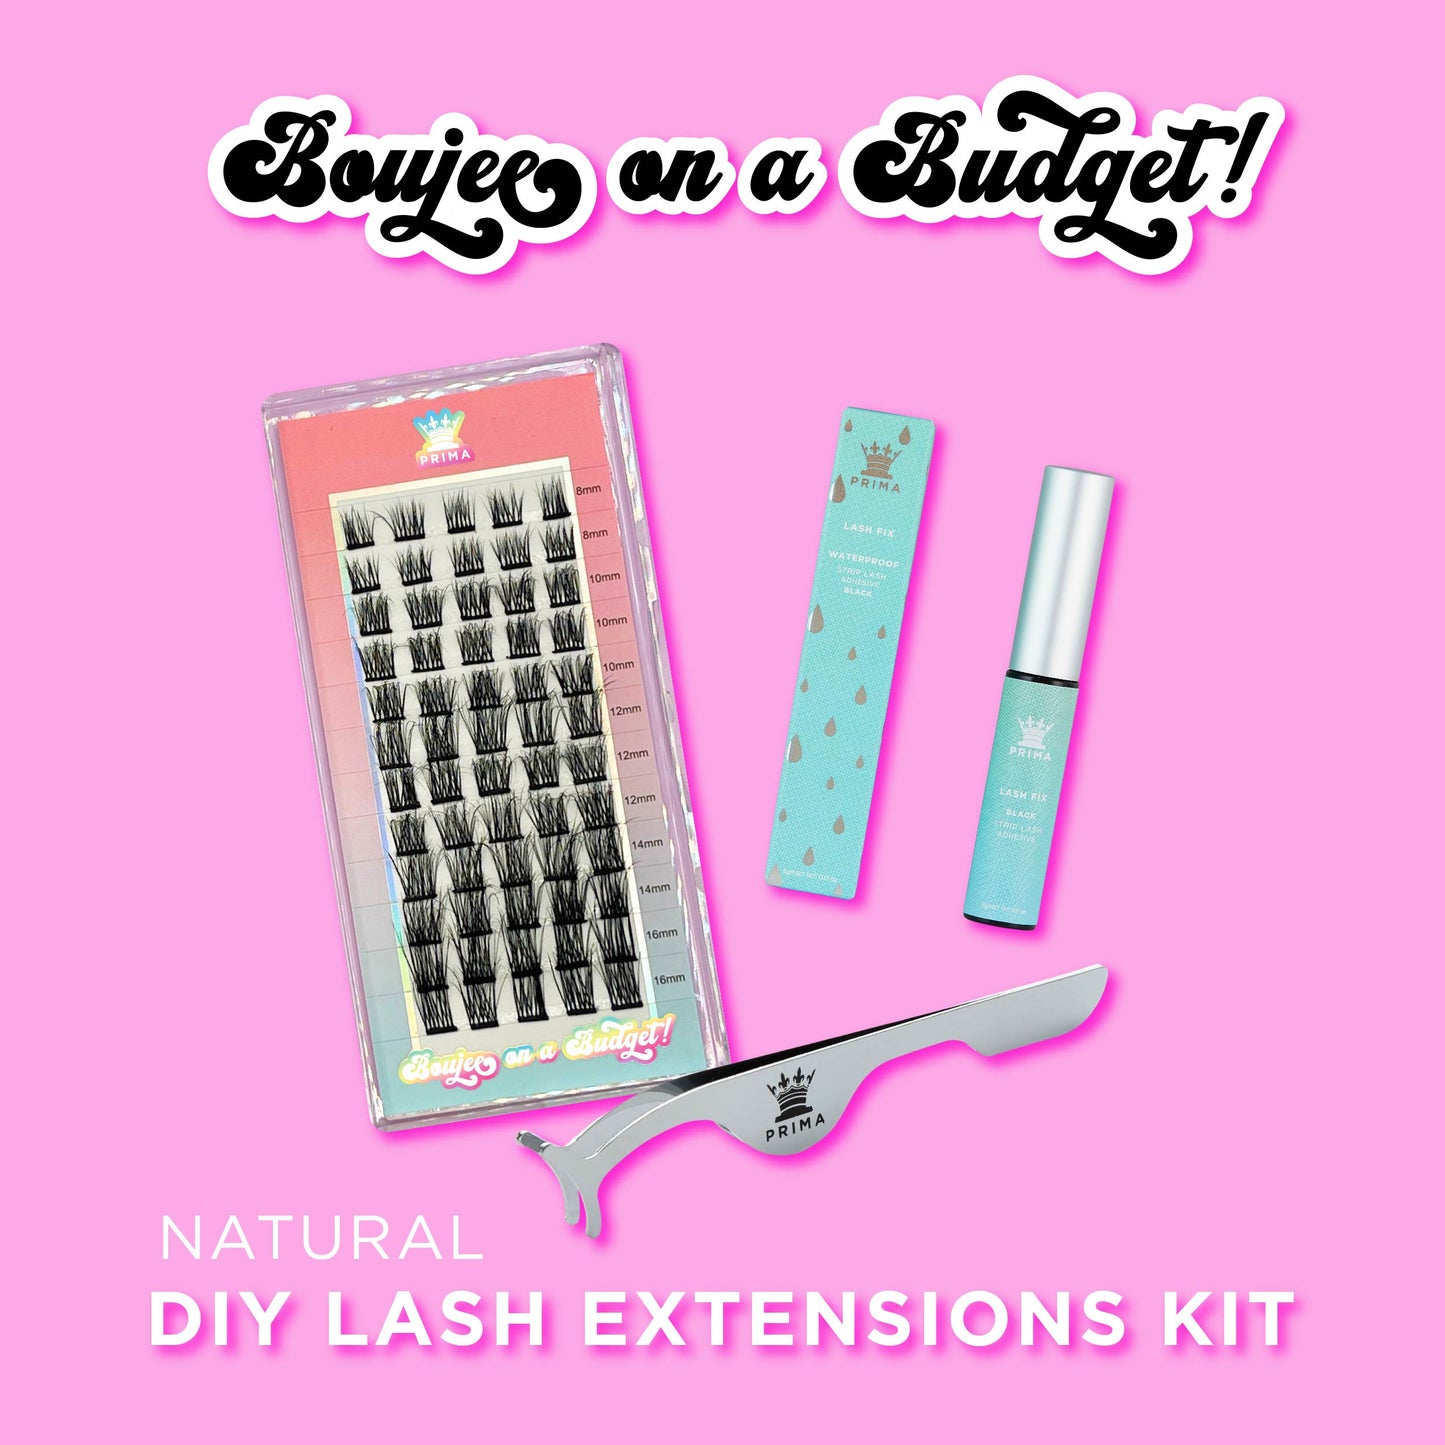 Boujee On a Budget (DIY Lash Extension Kit)